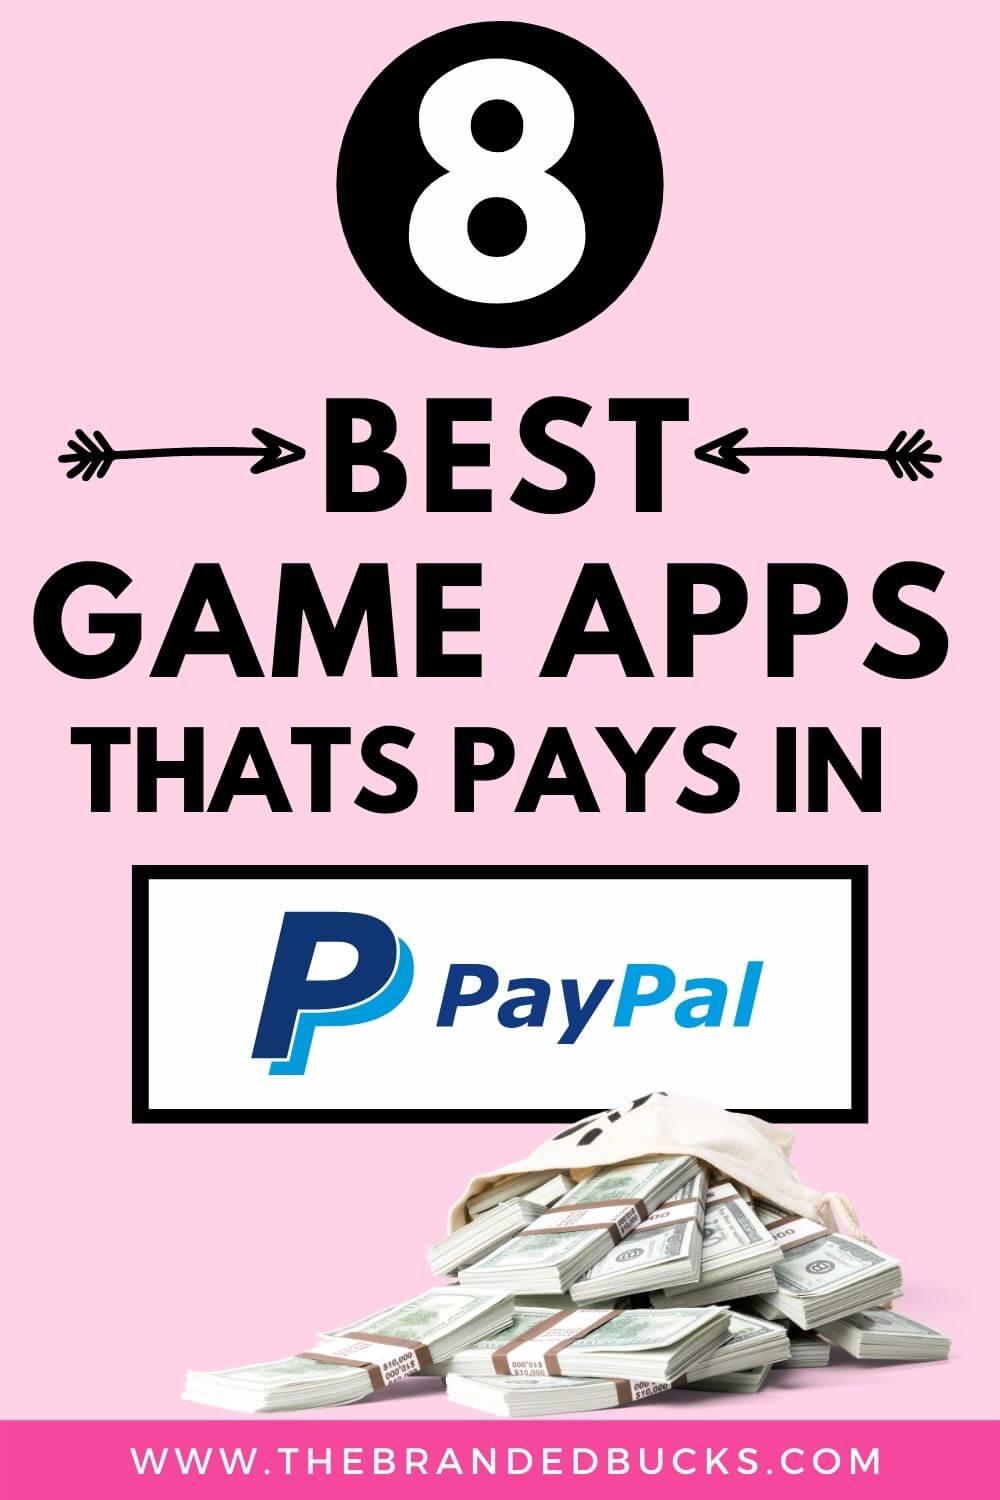 Game Apps That Pay Instantly To PayPal